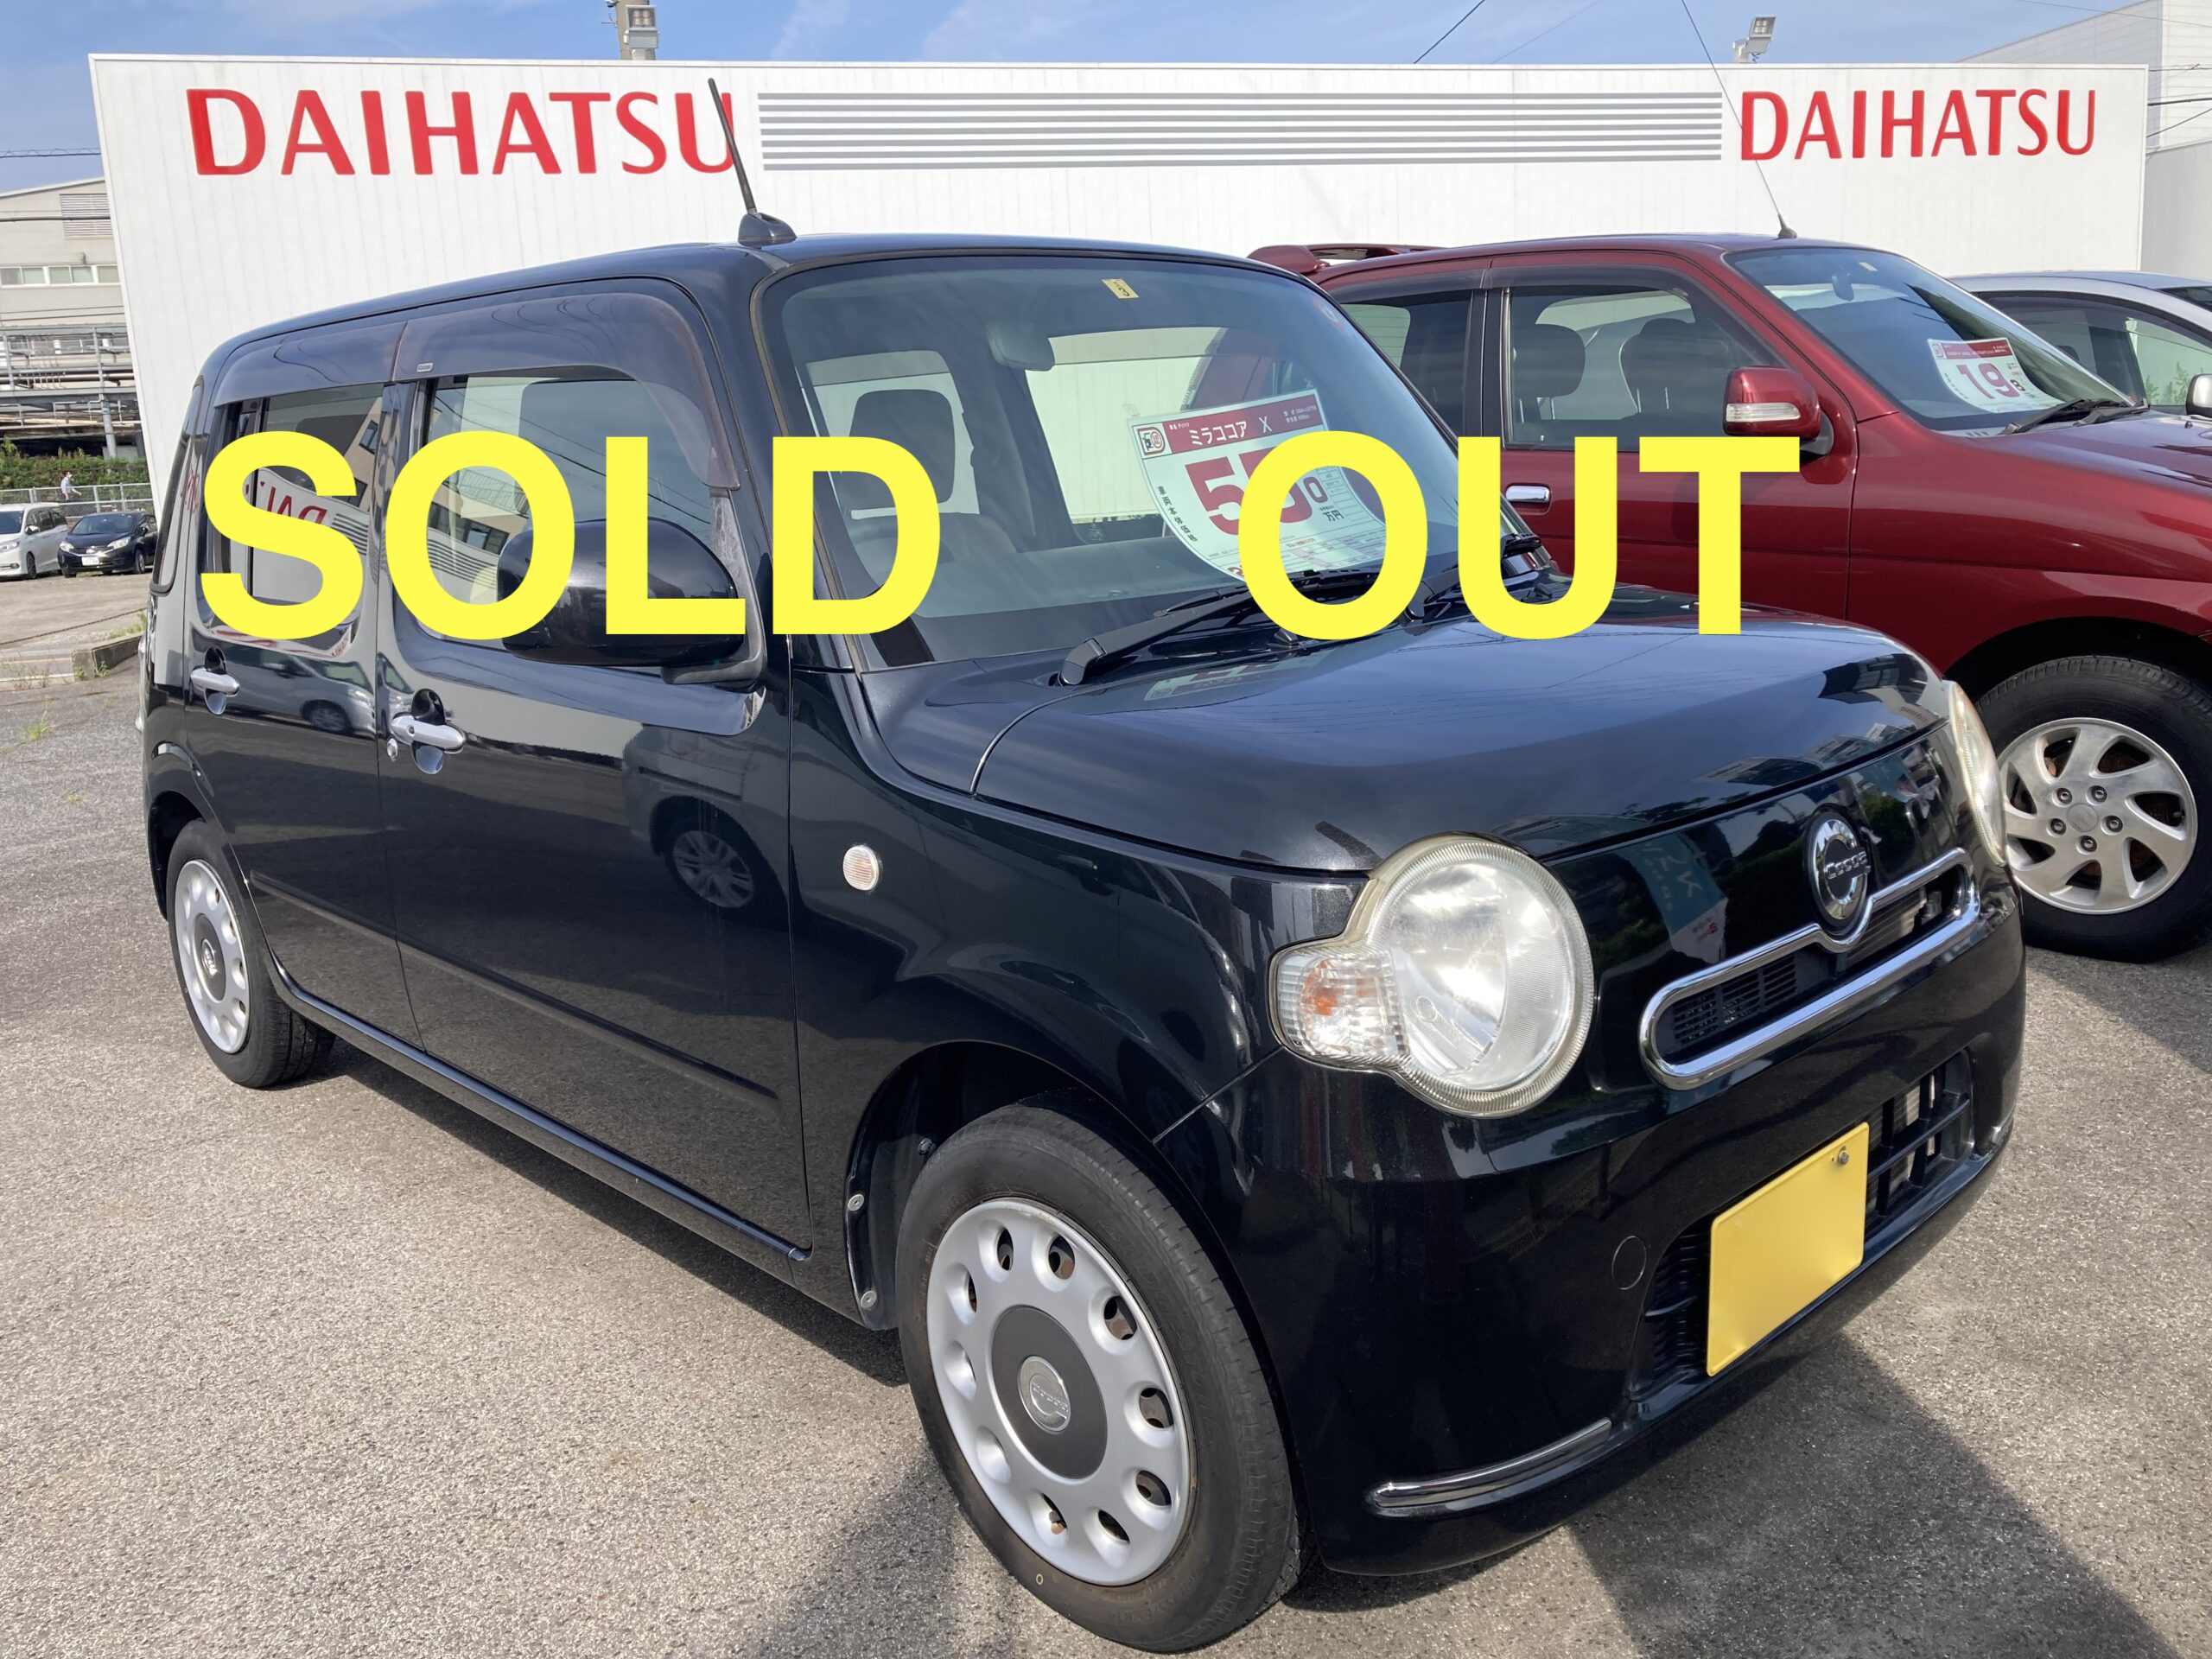 SOLD OUT | 中古車情報 | ミラココア | 平成26年式